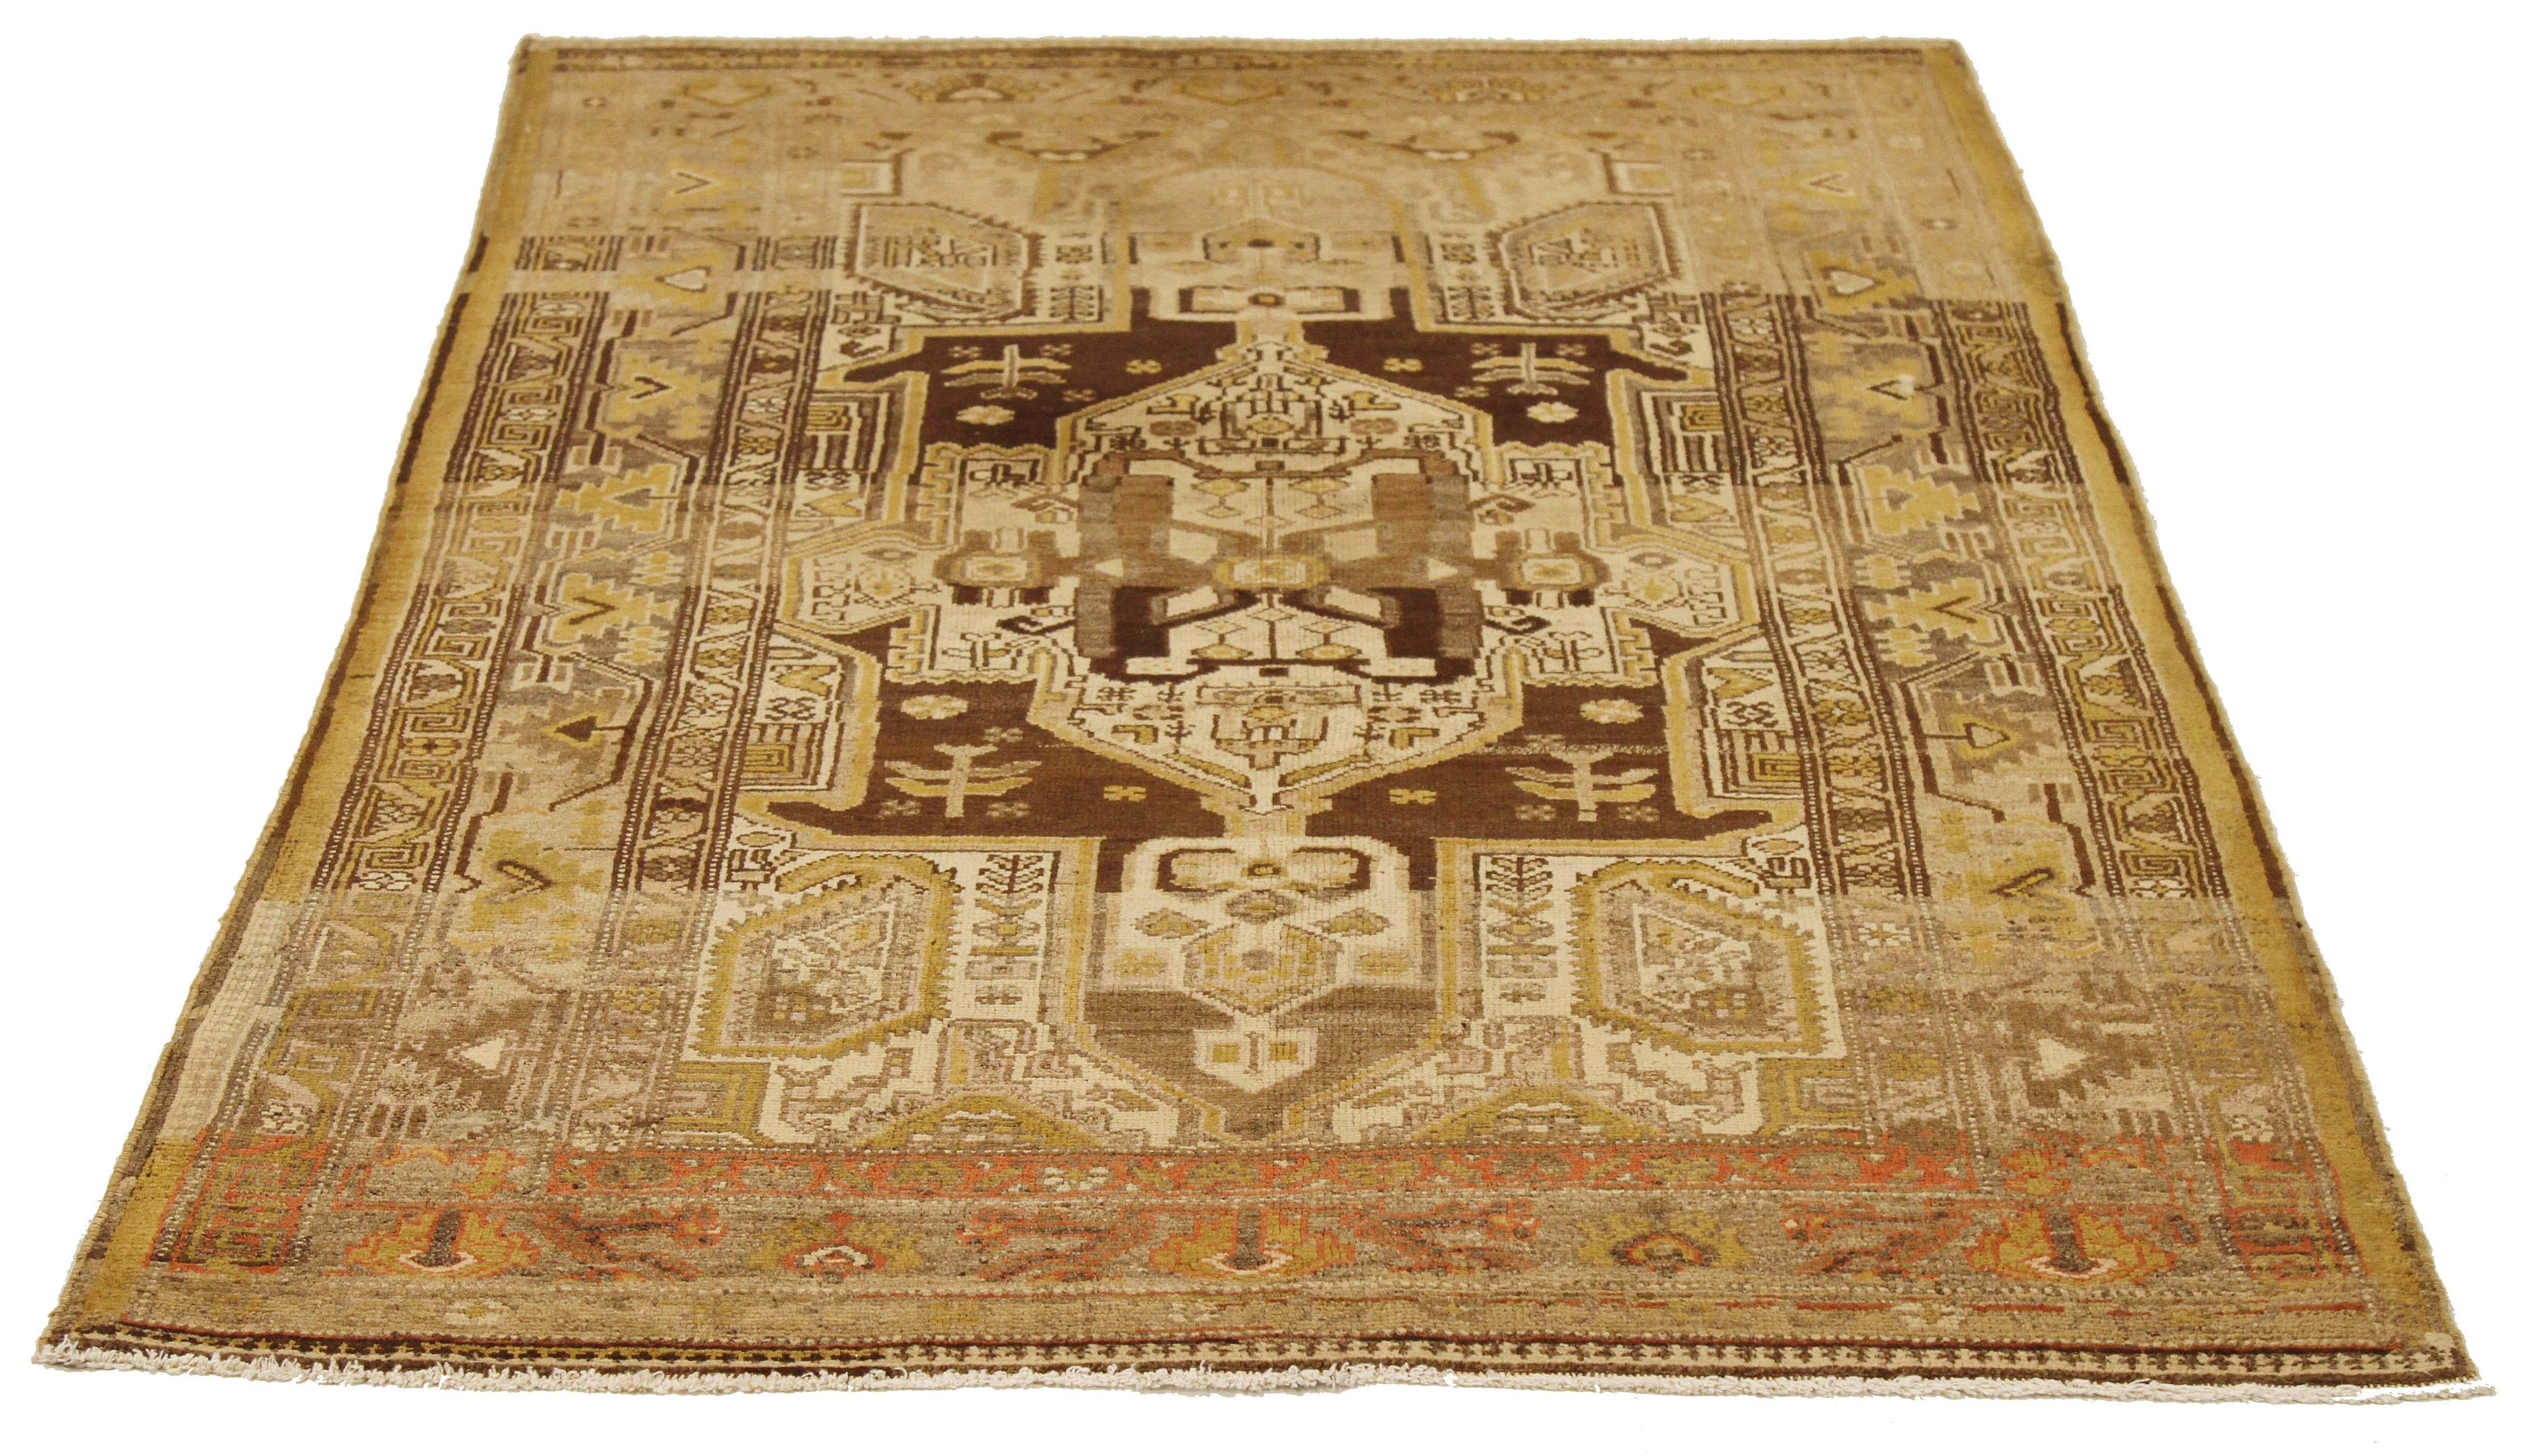 Antique Persian rug handwoven from the finest sheep’s wool and colored with all-natural vegetable dyes that are safe for humans and pets. It’s a traditional Zanjan design featuring geometric and floral details in brown and gold on an ivory field.